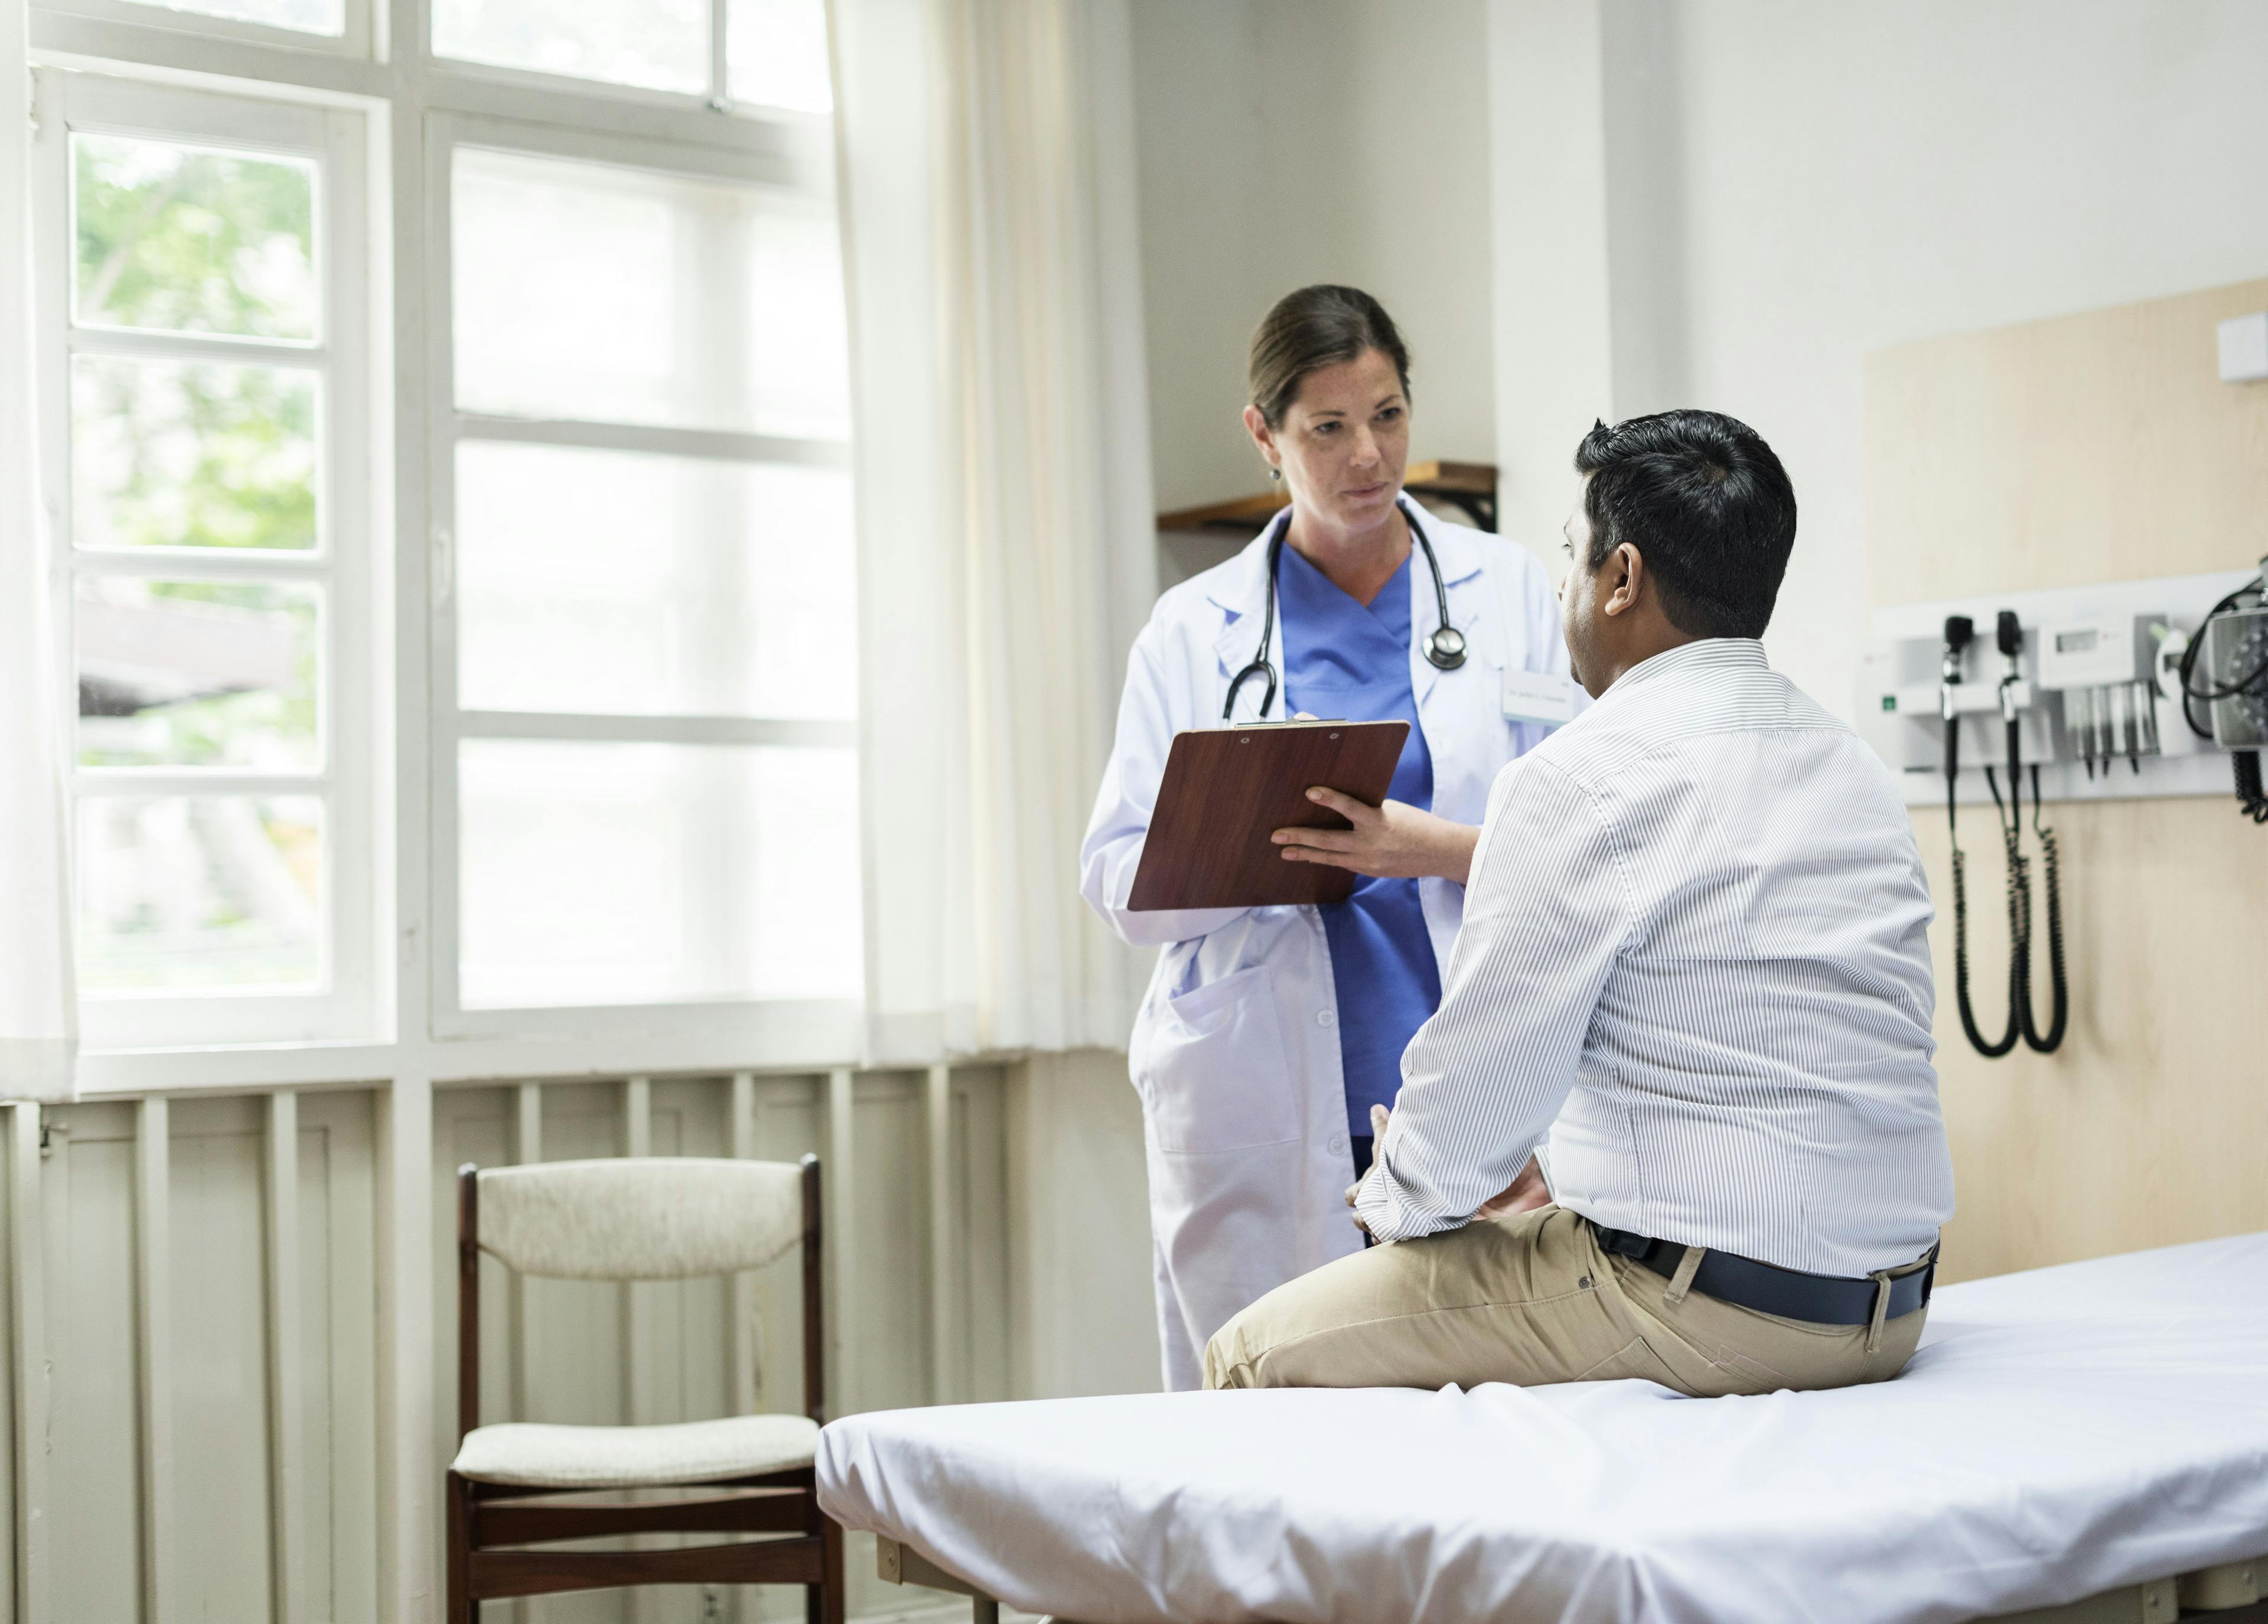 Male patient talking to doctor